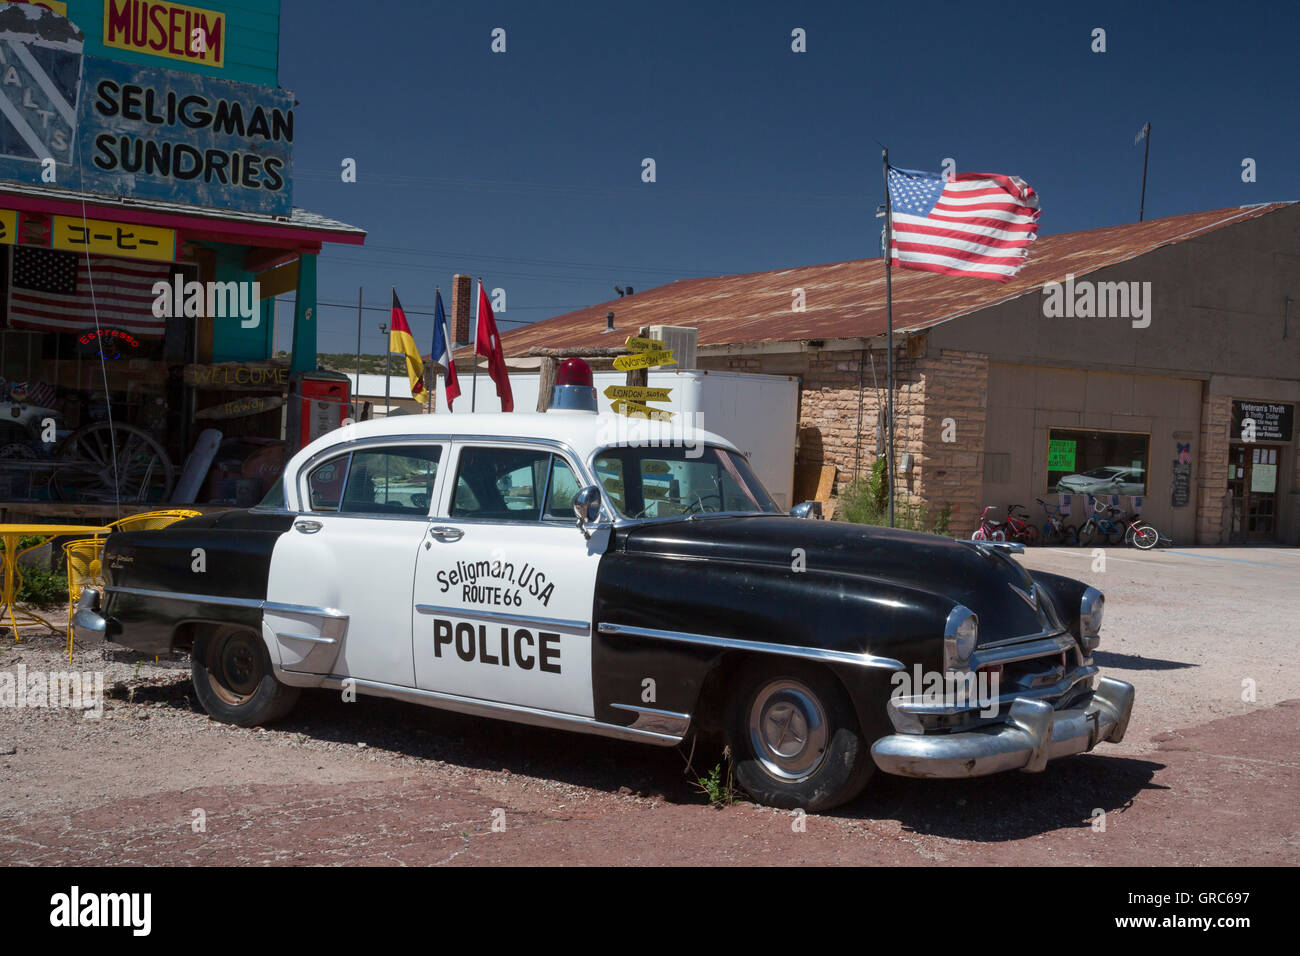 Seligman, Arizona - Souvenir shops and other tourist attractions line US Route 66. Stock Photo